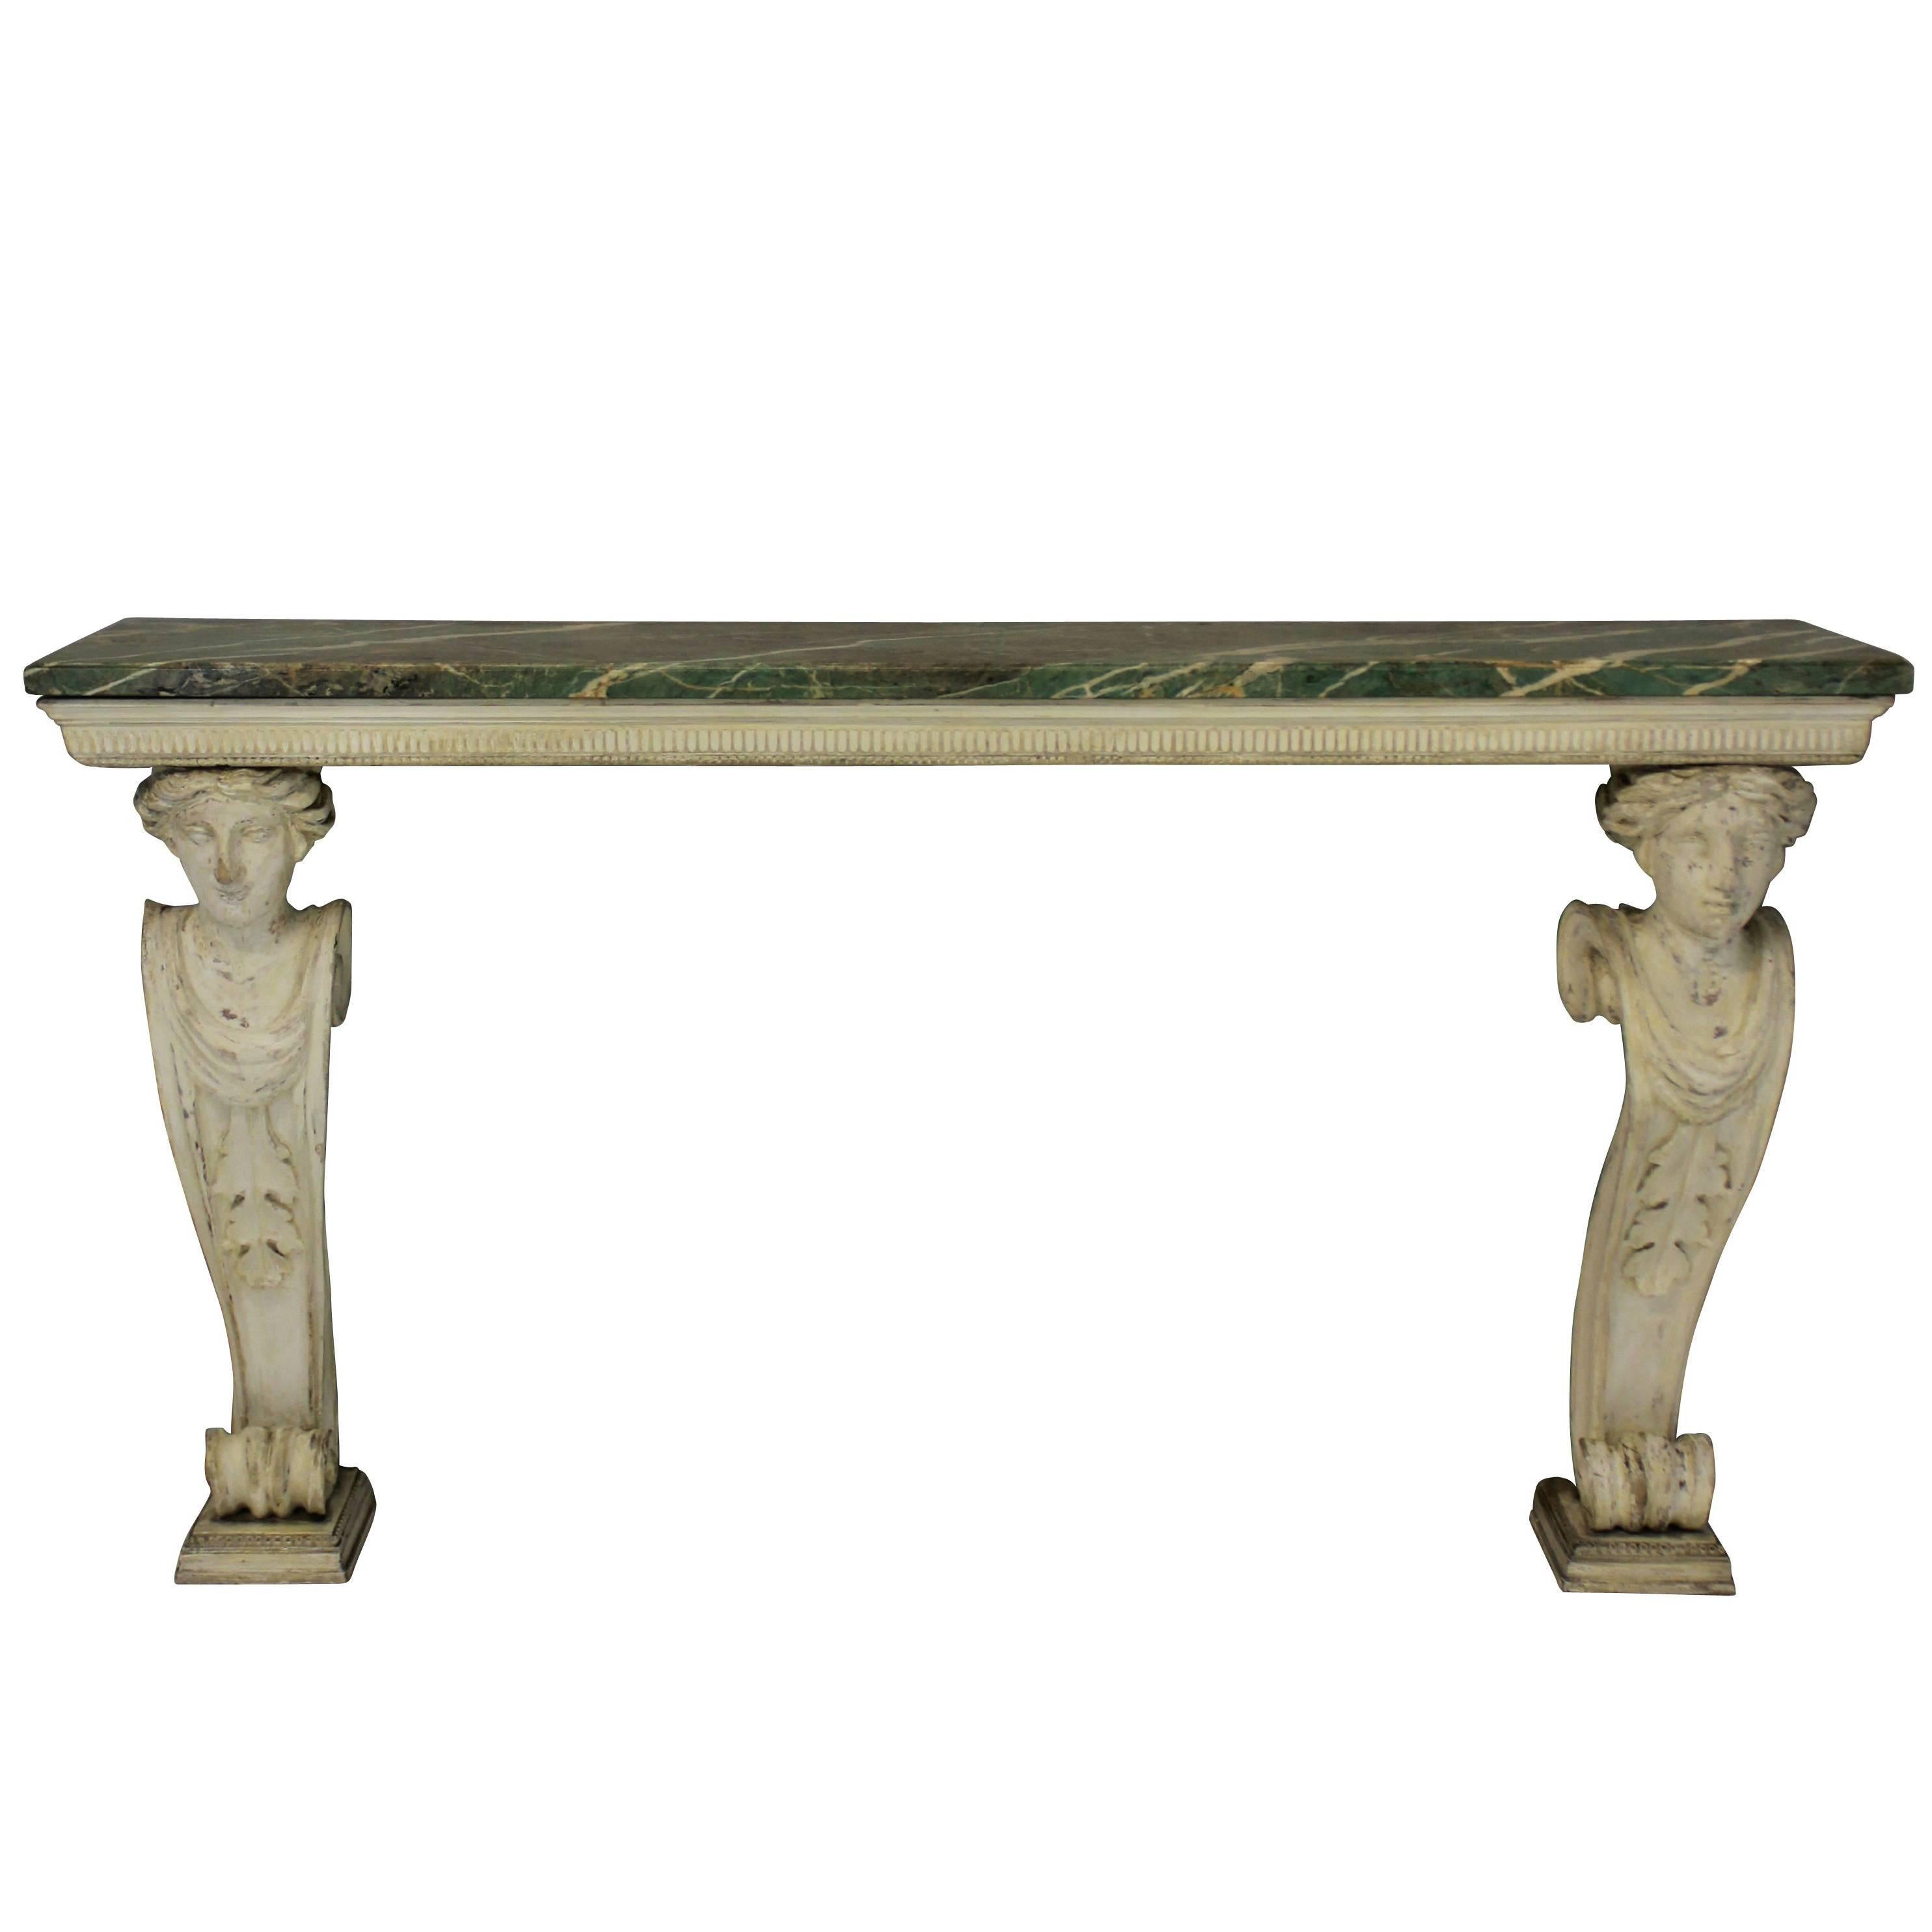 A large English console table in the manner of William Kent, finely carved with the original gesso showing. It comprises two caryatids with scrolled backs, supporting a simple frieze with an unusual marble top in pale greens.

 